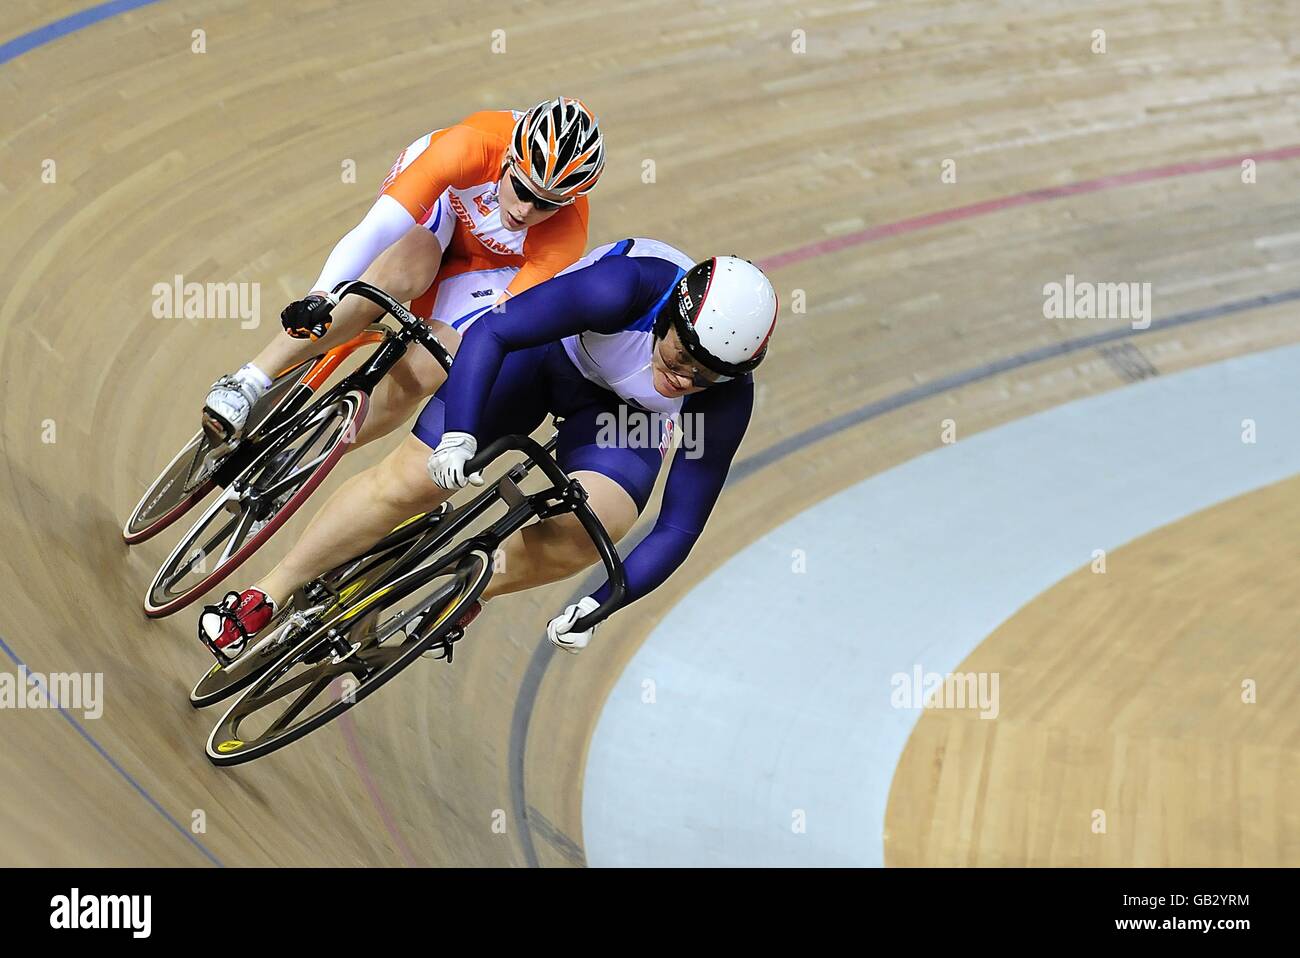 USA's Jennie Reed (right) and Netherland's Willy Kanis during the Women's Sprint Quarterfinals at the Laoshan Velodrome during the 2008 Beijing Olympic Games in China. Stock Photo